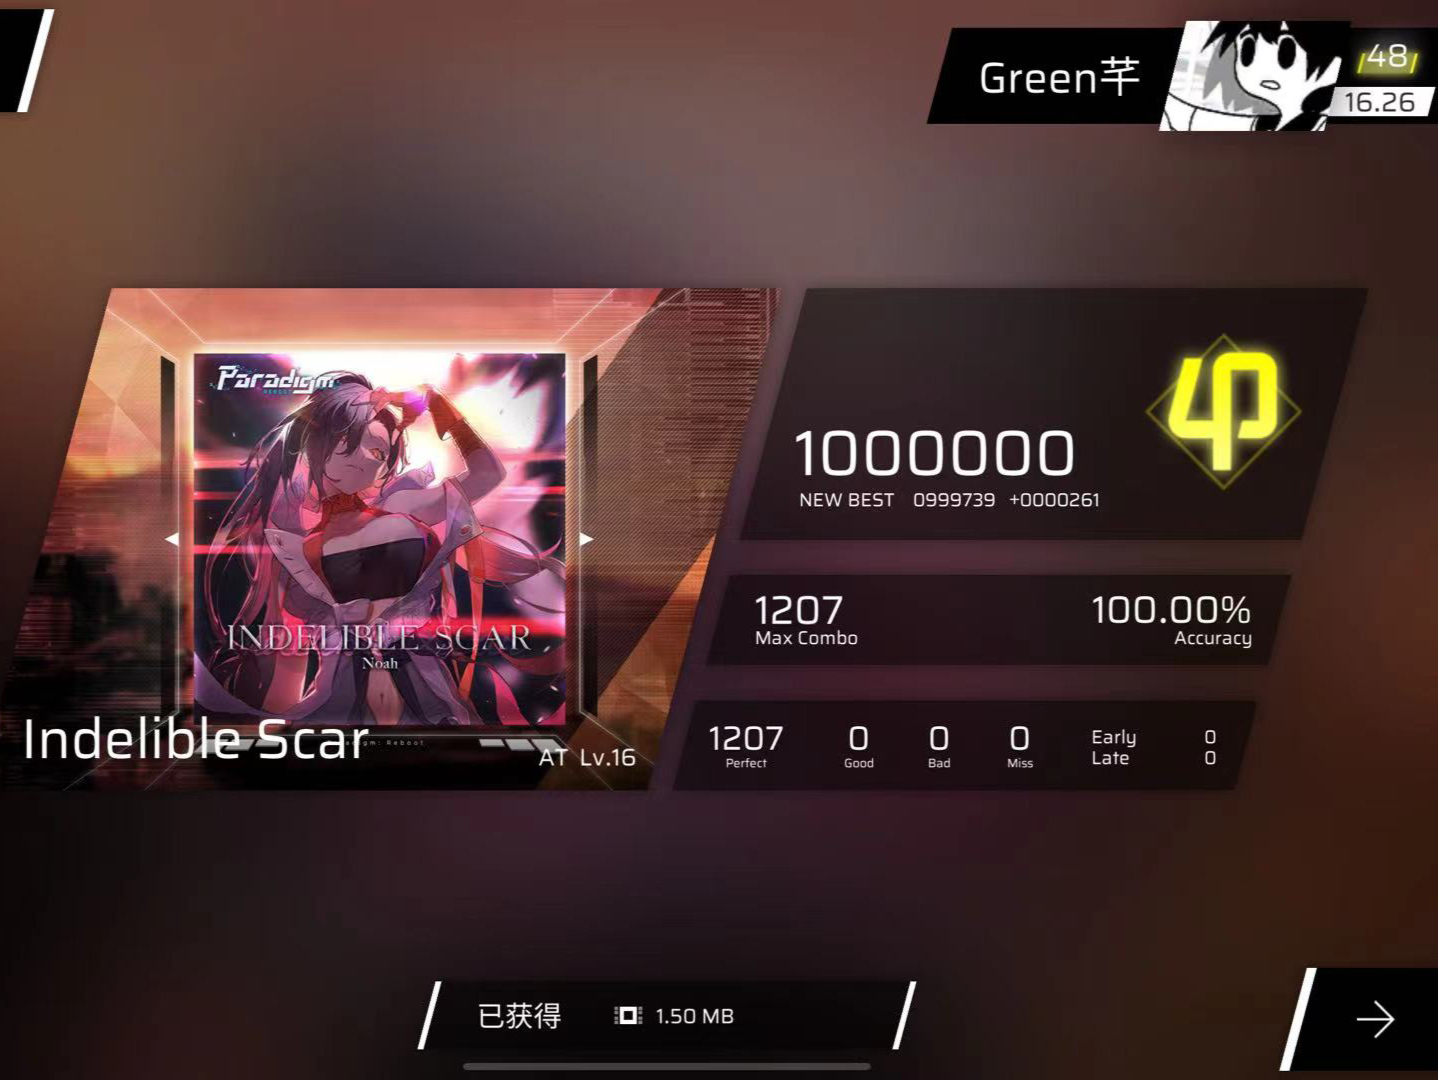 【Phigros/新曲速递】Indelible Scar AT16 ALL PERFECT